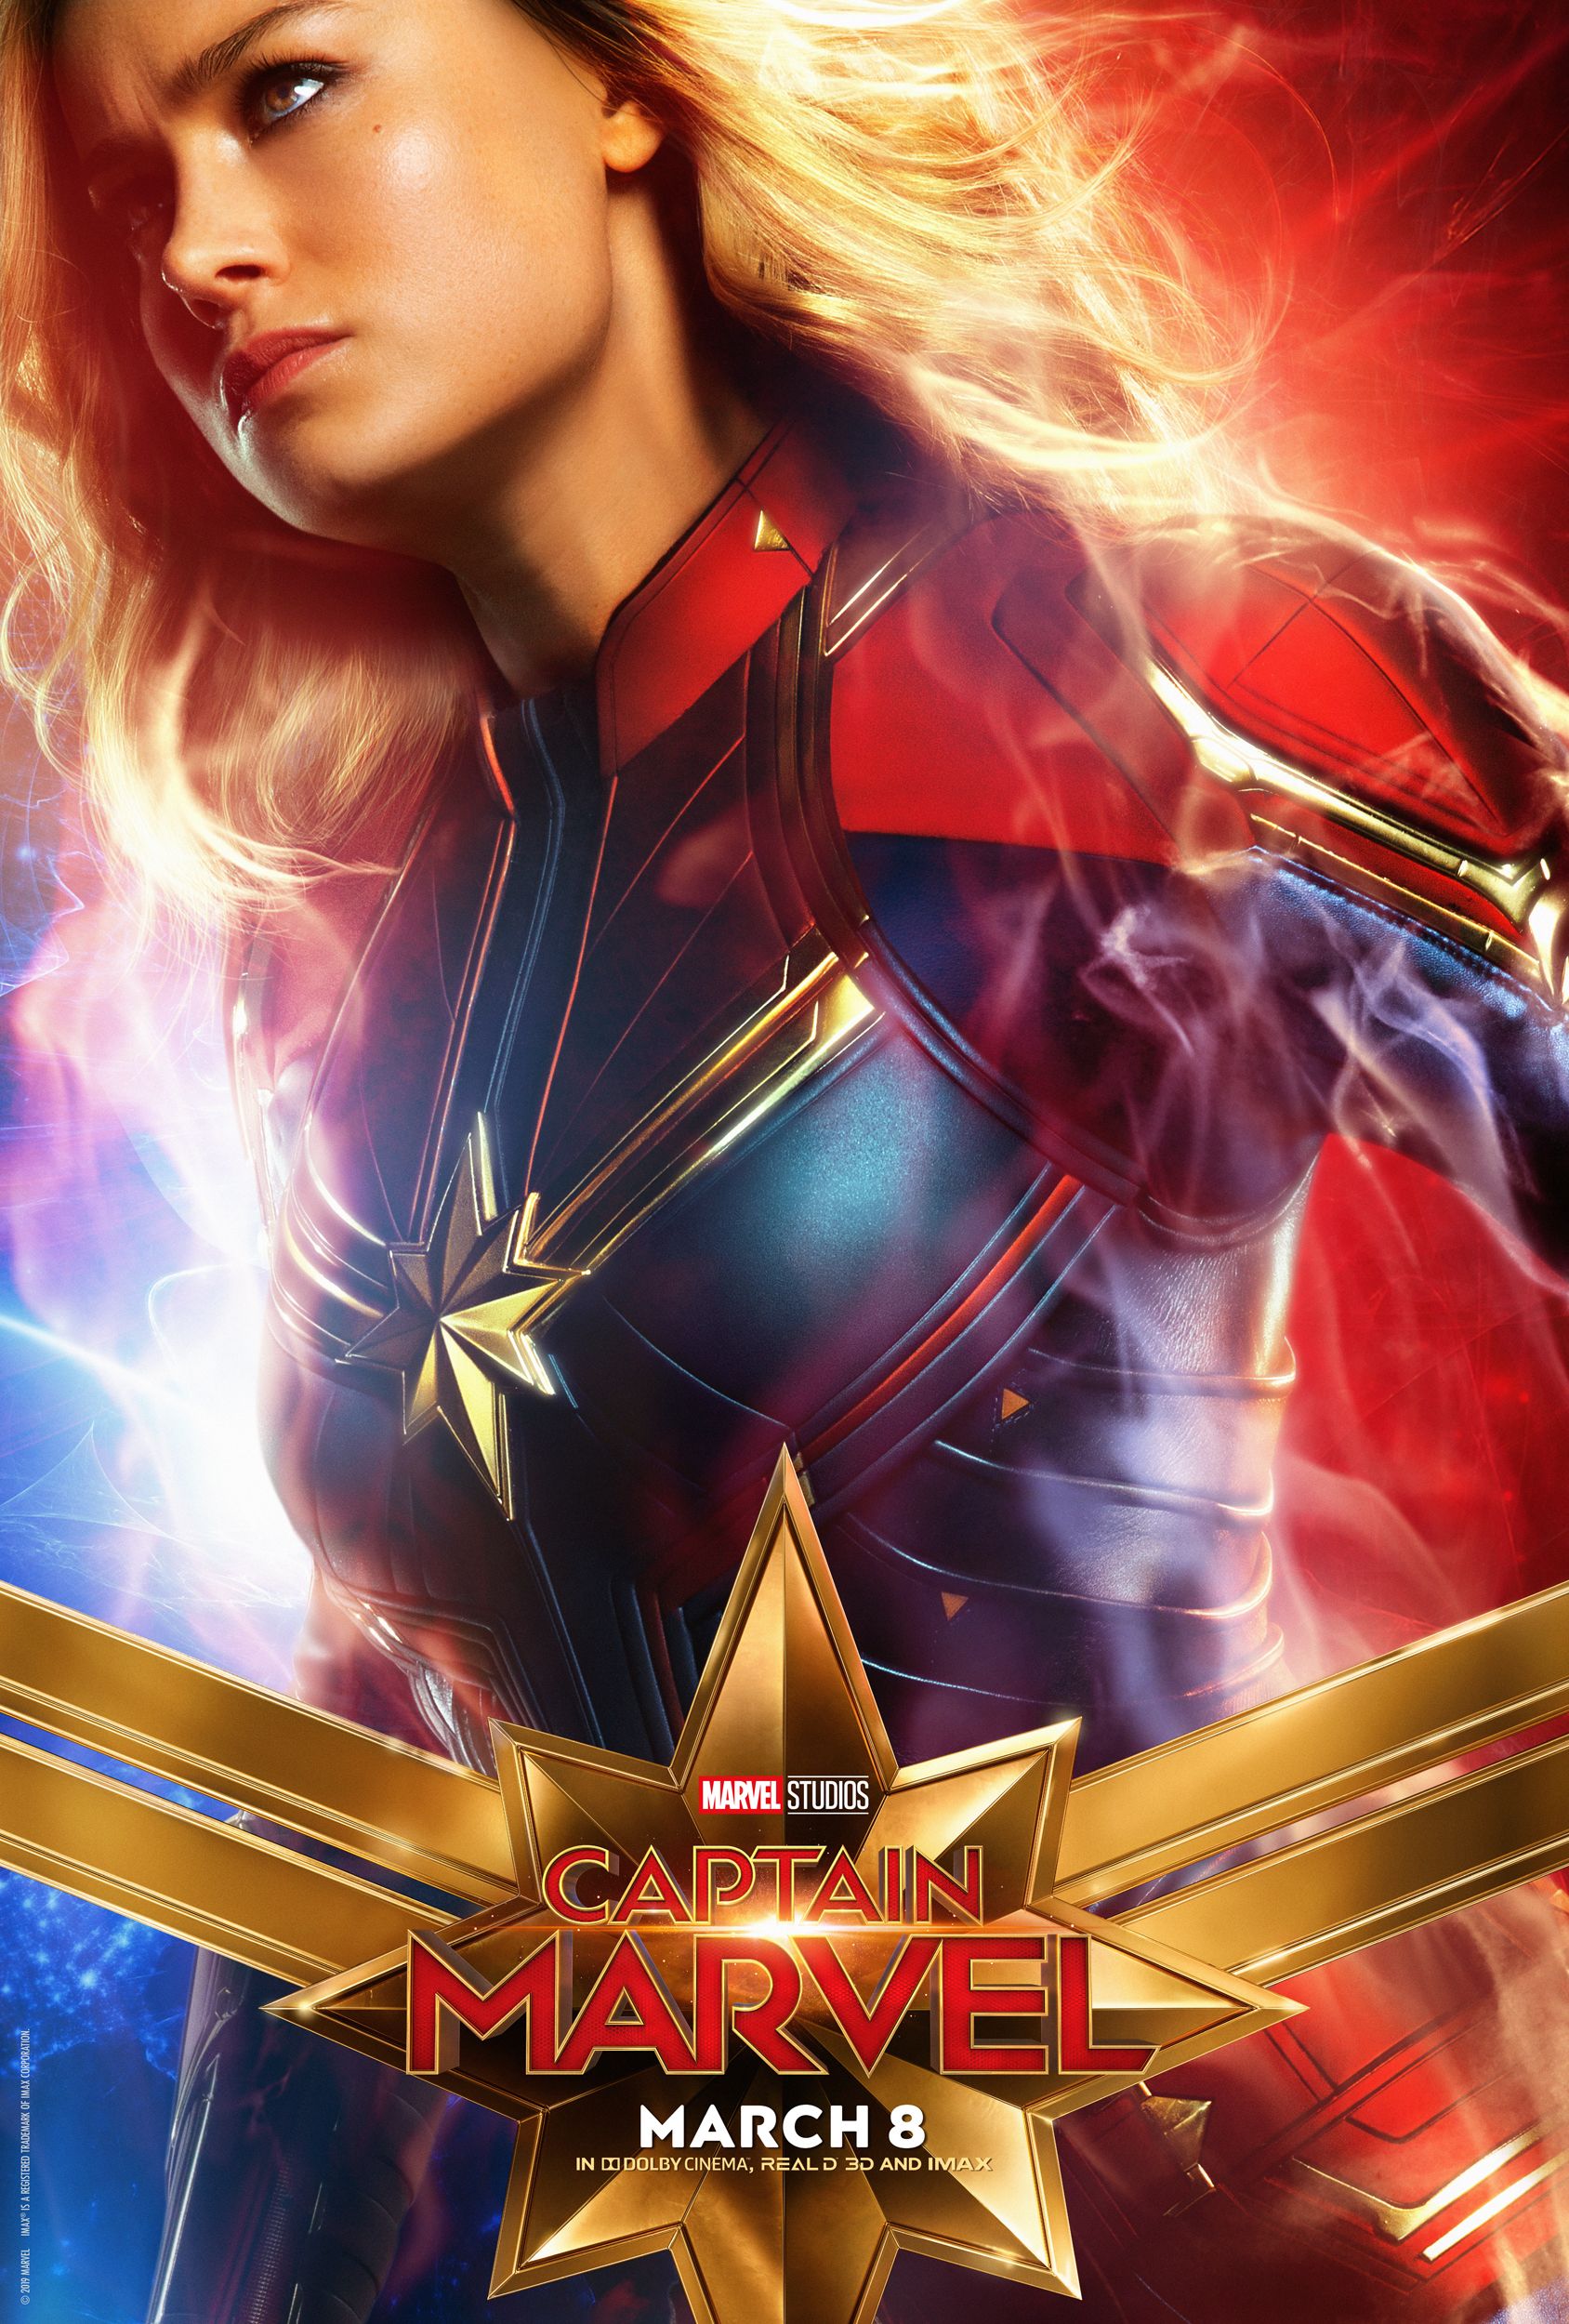 Captain Marvel Character Posters Reveal Brie Larson, Goose